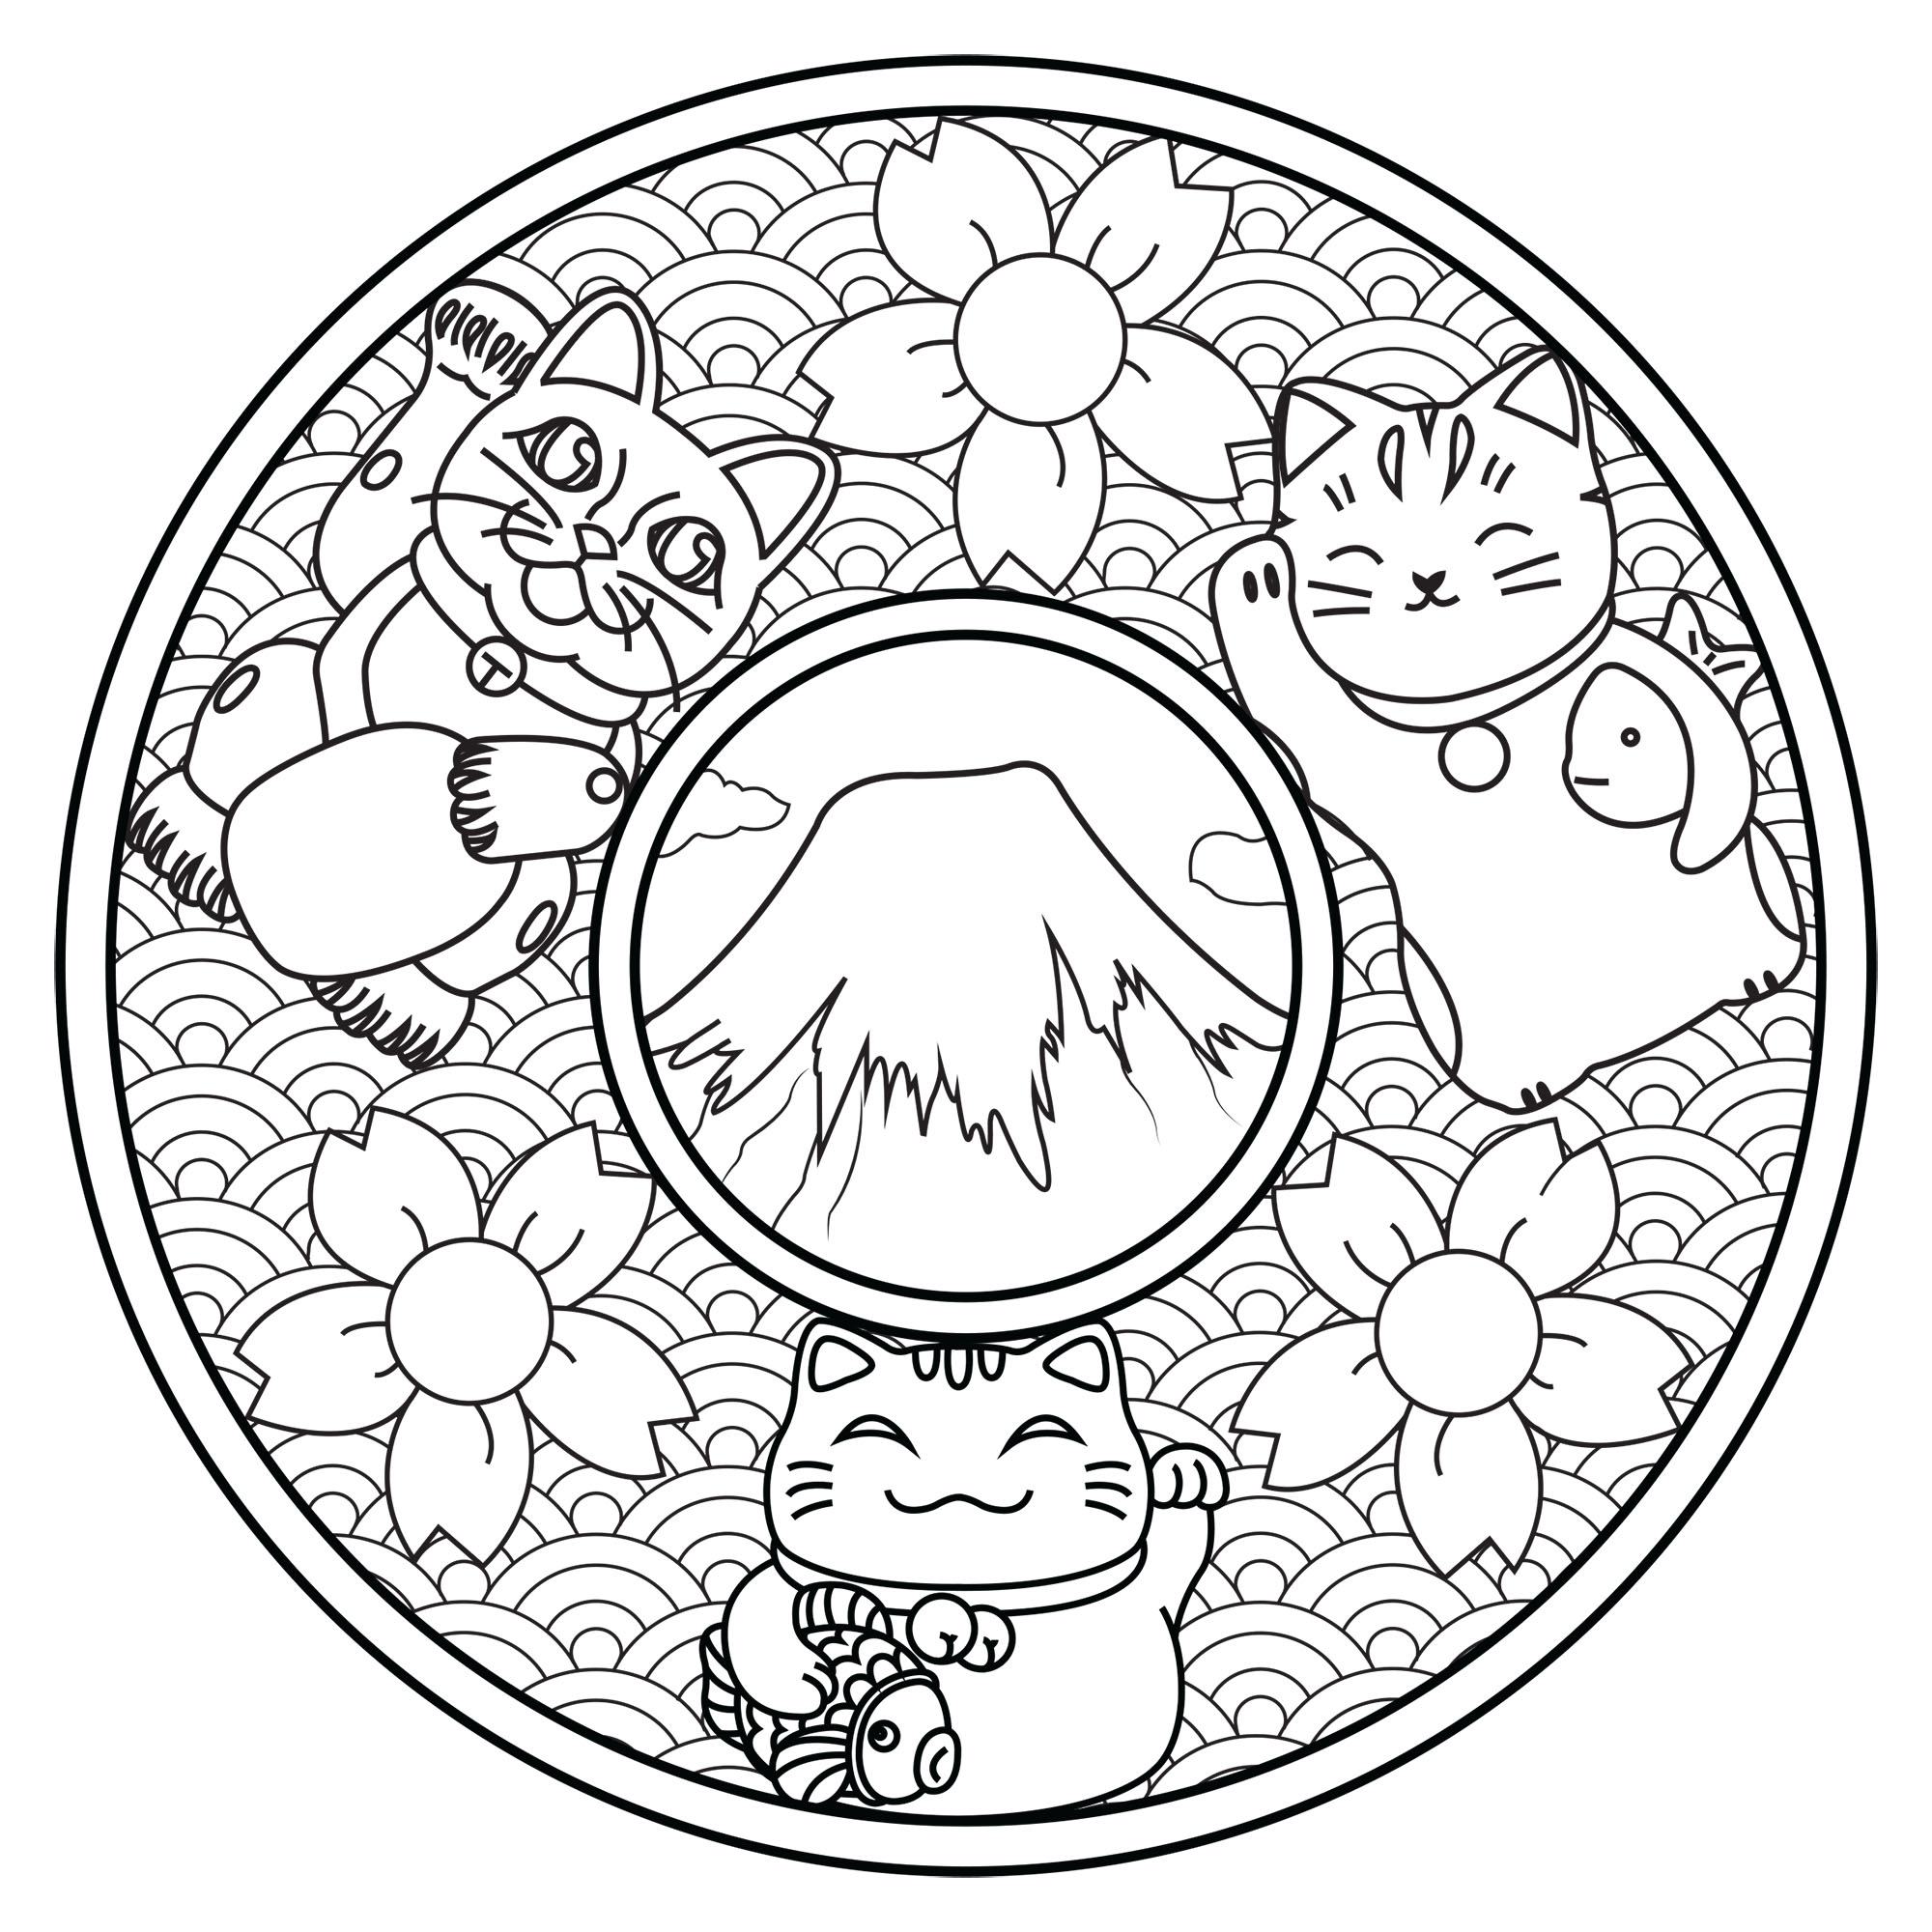 Color these three cute cats on this Mandala inspired by Japan : Mount Fuji, Cherry Blossom flowers, waves .., Artist : Lucie